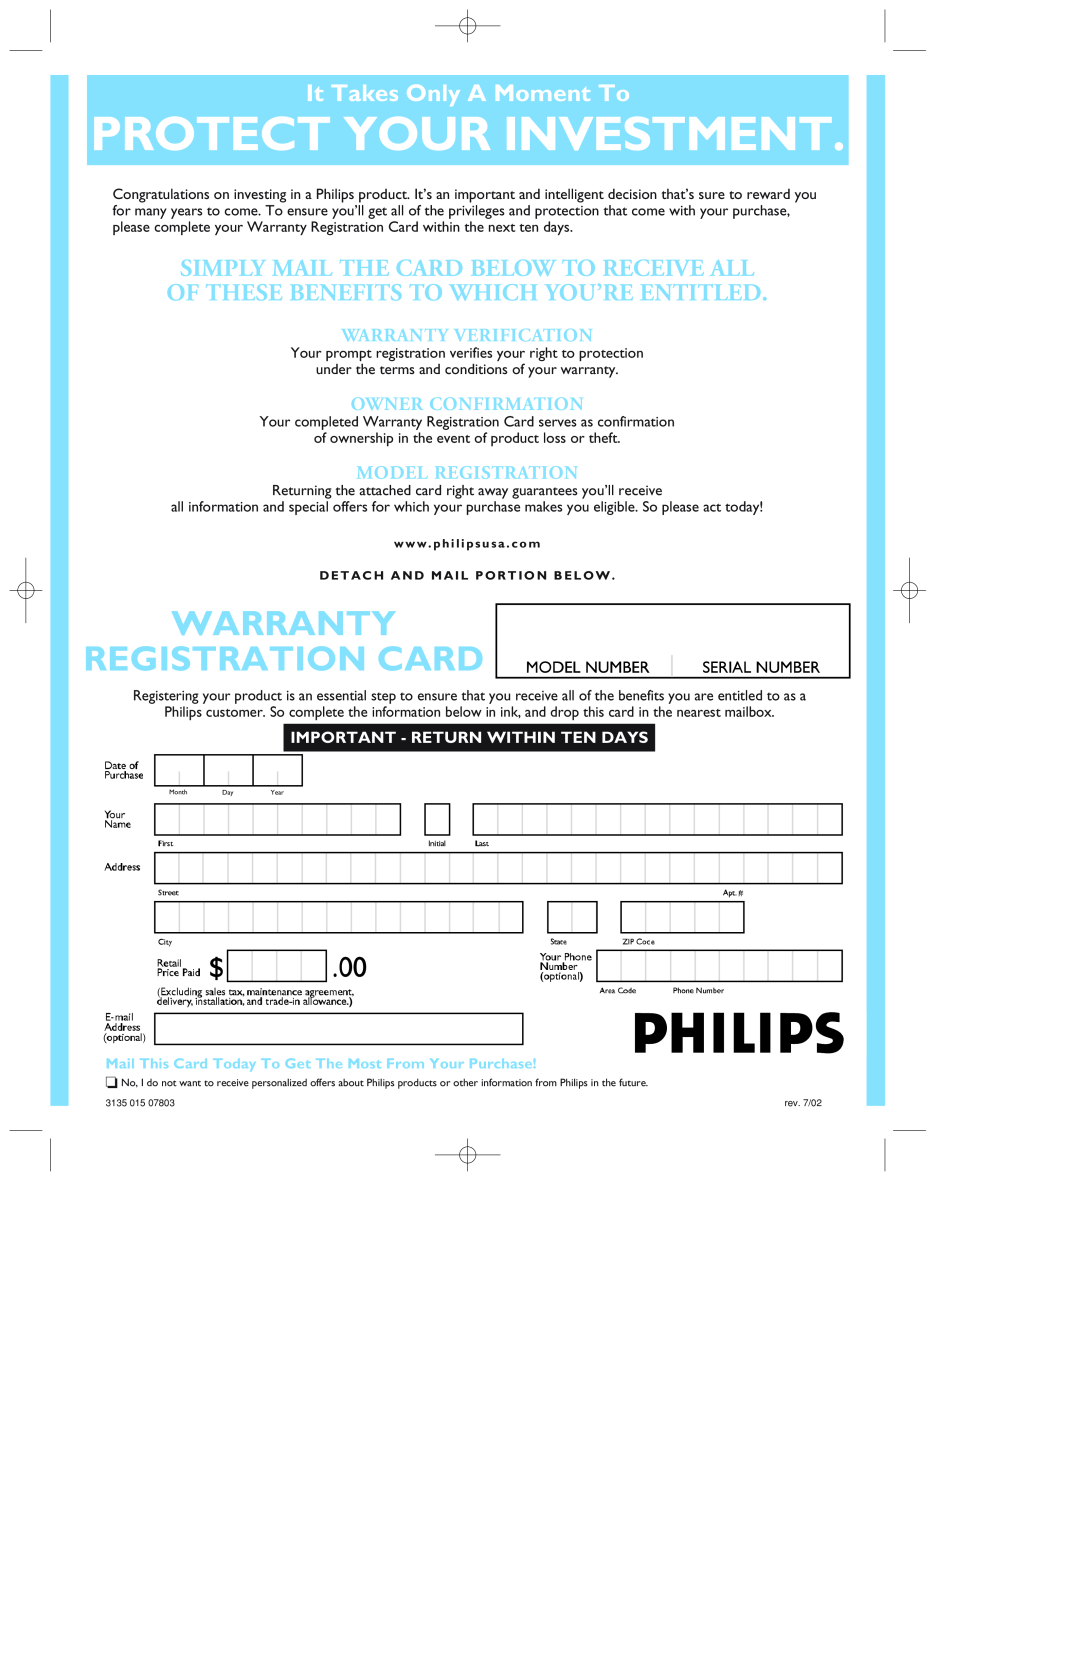 Philips 109B7, 109F7 Protect Your Investment, Warranty Registration Card, It Takes Only A Moment To, Warranty Verification 